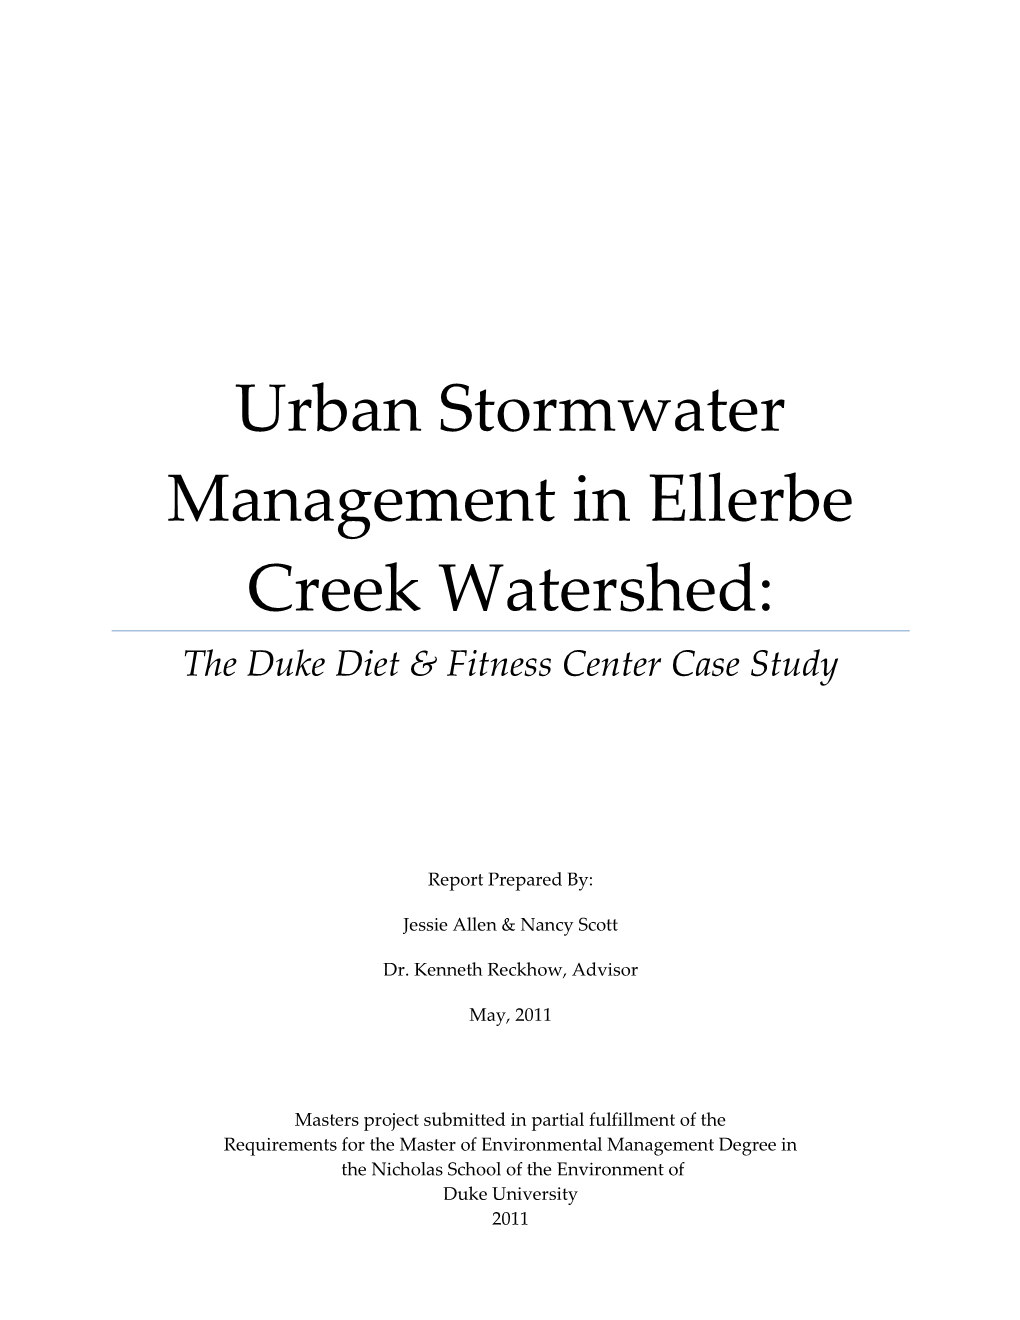 Urban Stormwater Management in Ellerbe Creek Watershed: the Duke Diet & Fitness Center Case Study